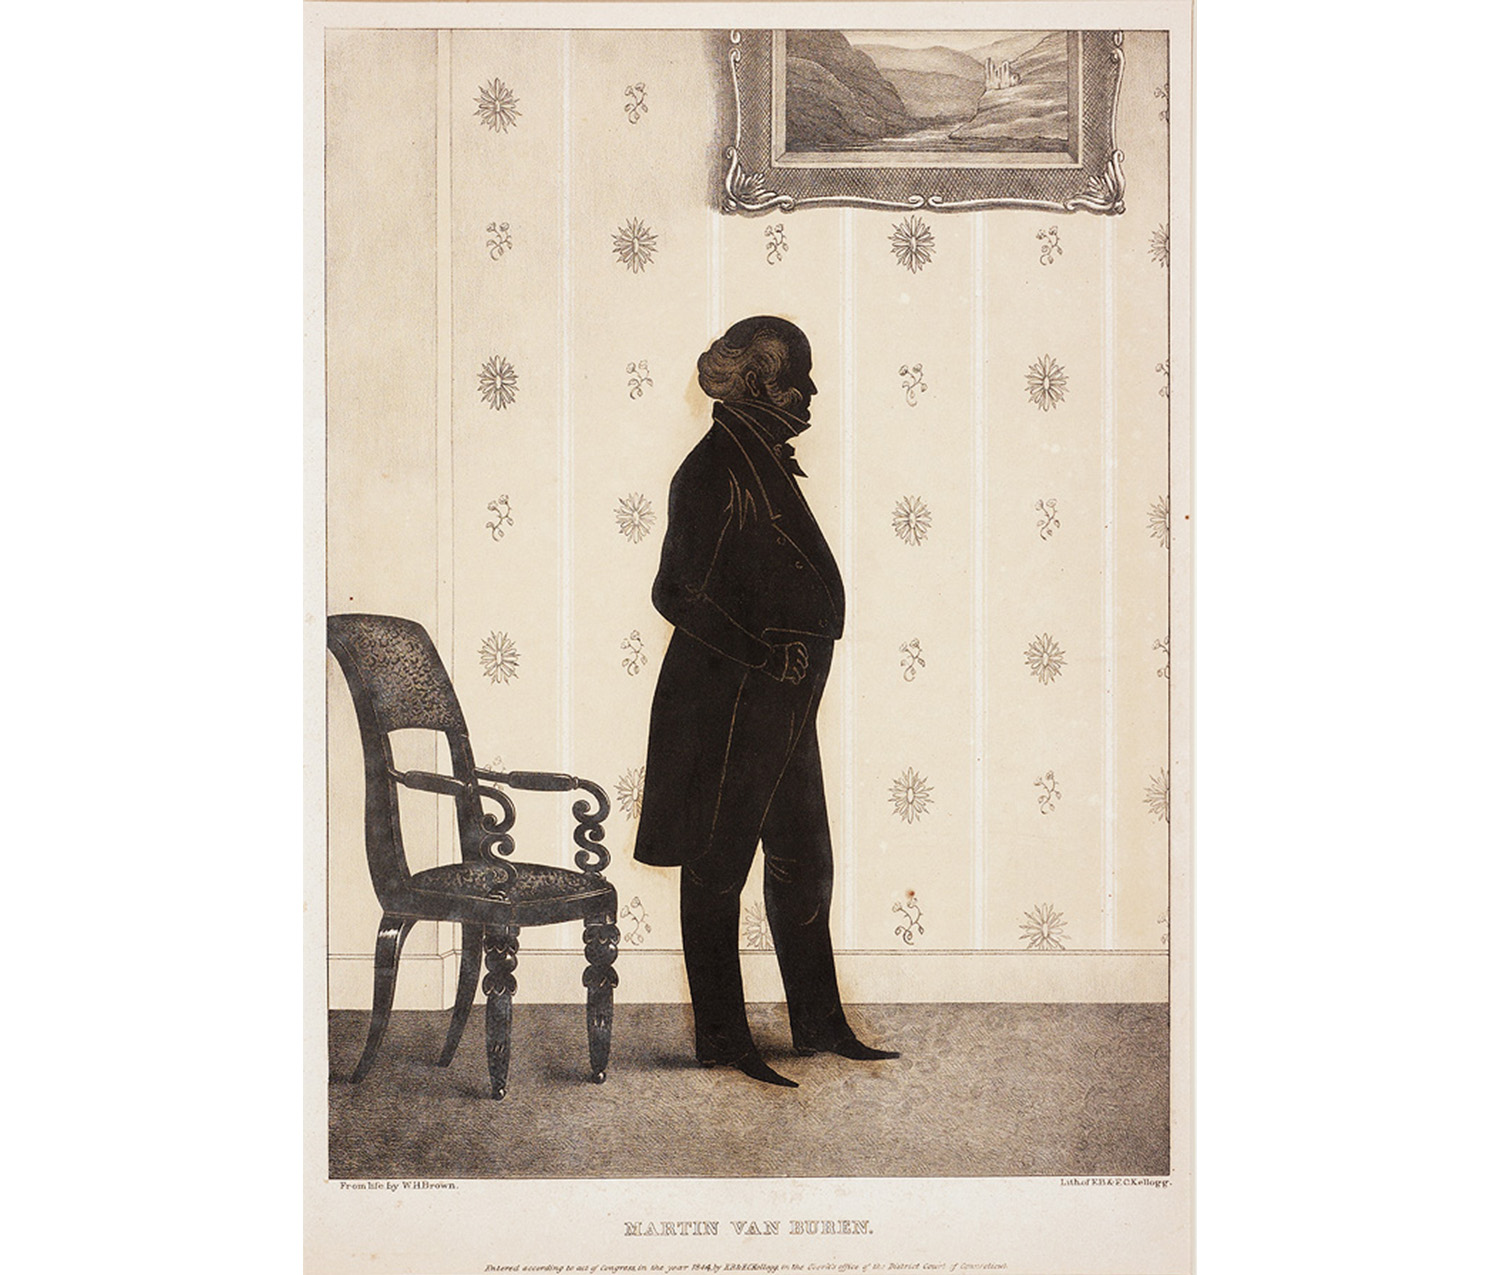 right profile full length silhouette portrait of an elderly man in black, balding with curly hair, wearing a long tailcoat standing near a chair in a room with patterned wallpaper and a painting on wall